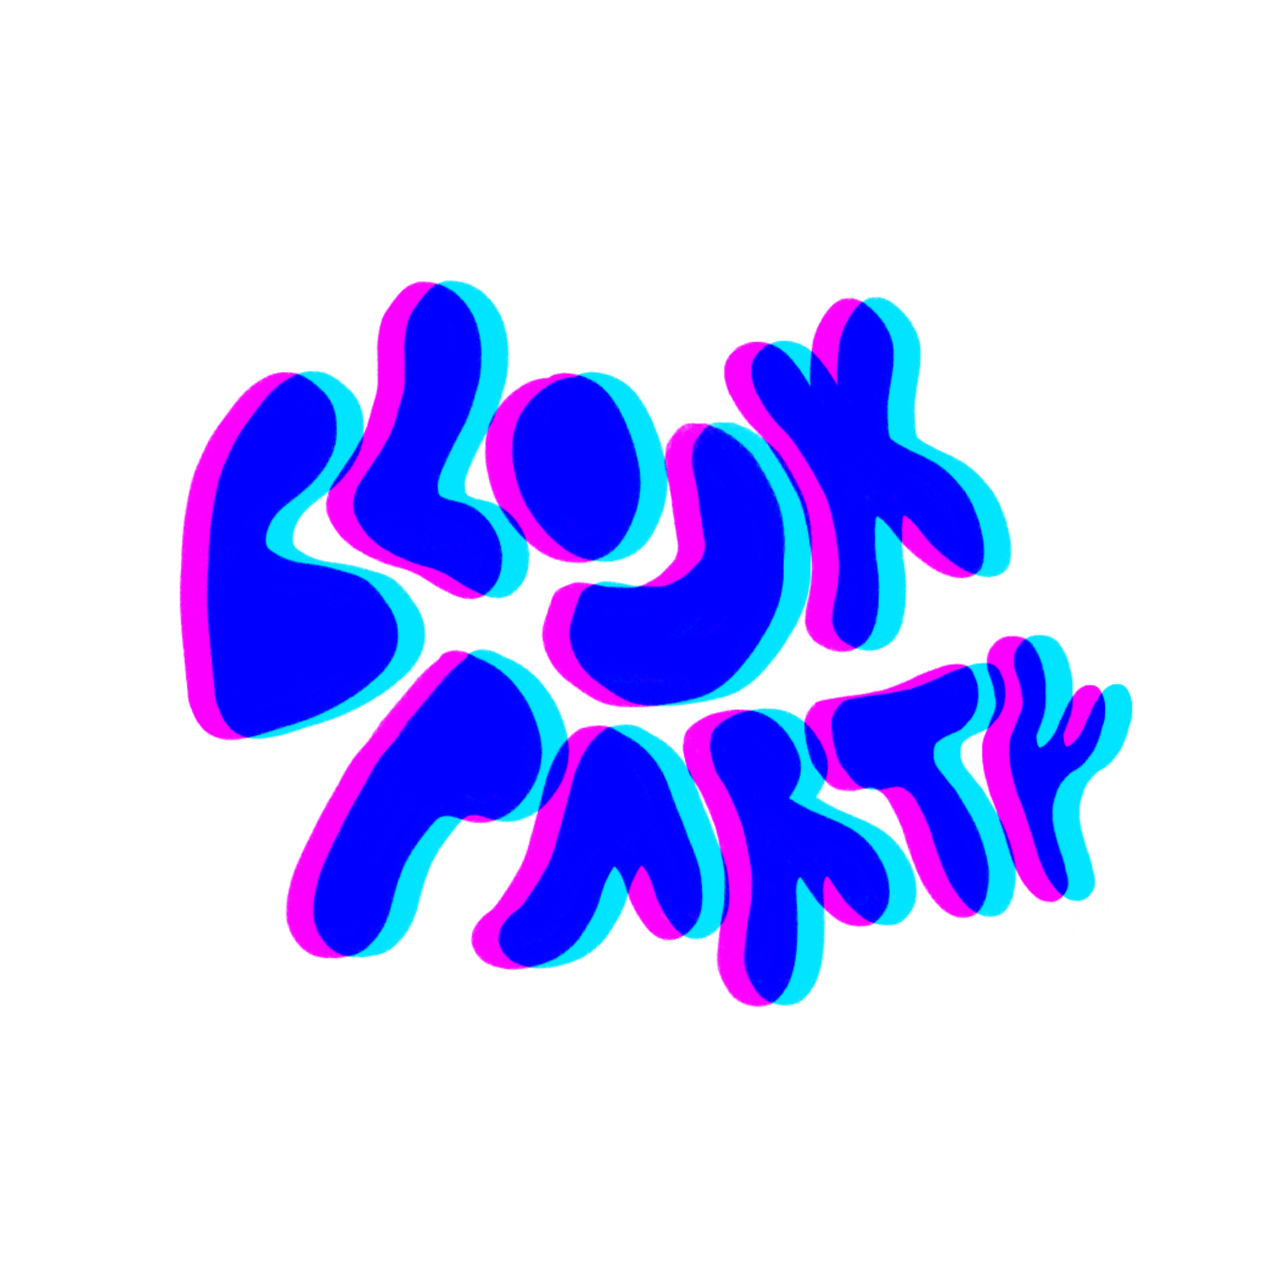 Chill Aesthetic Theme PNG Picture